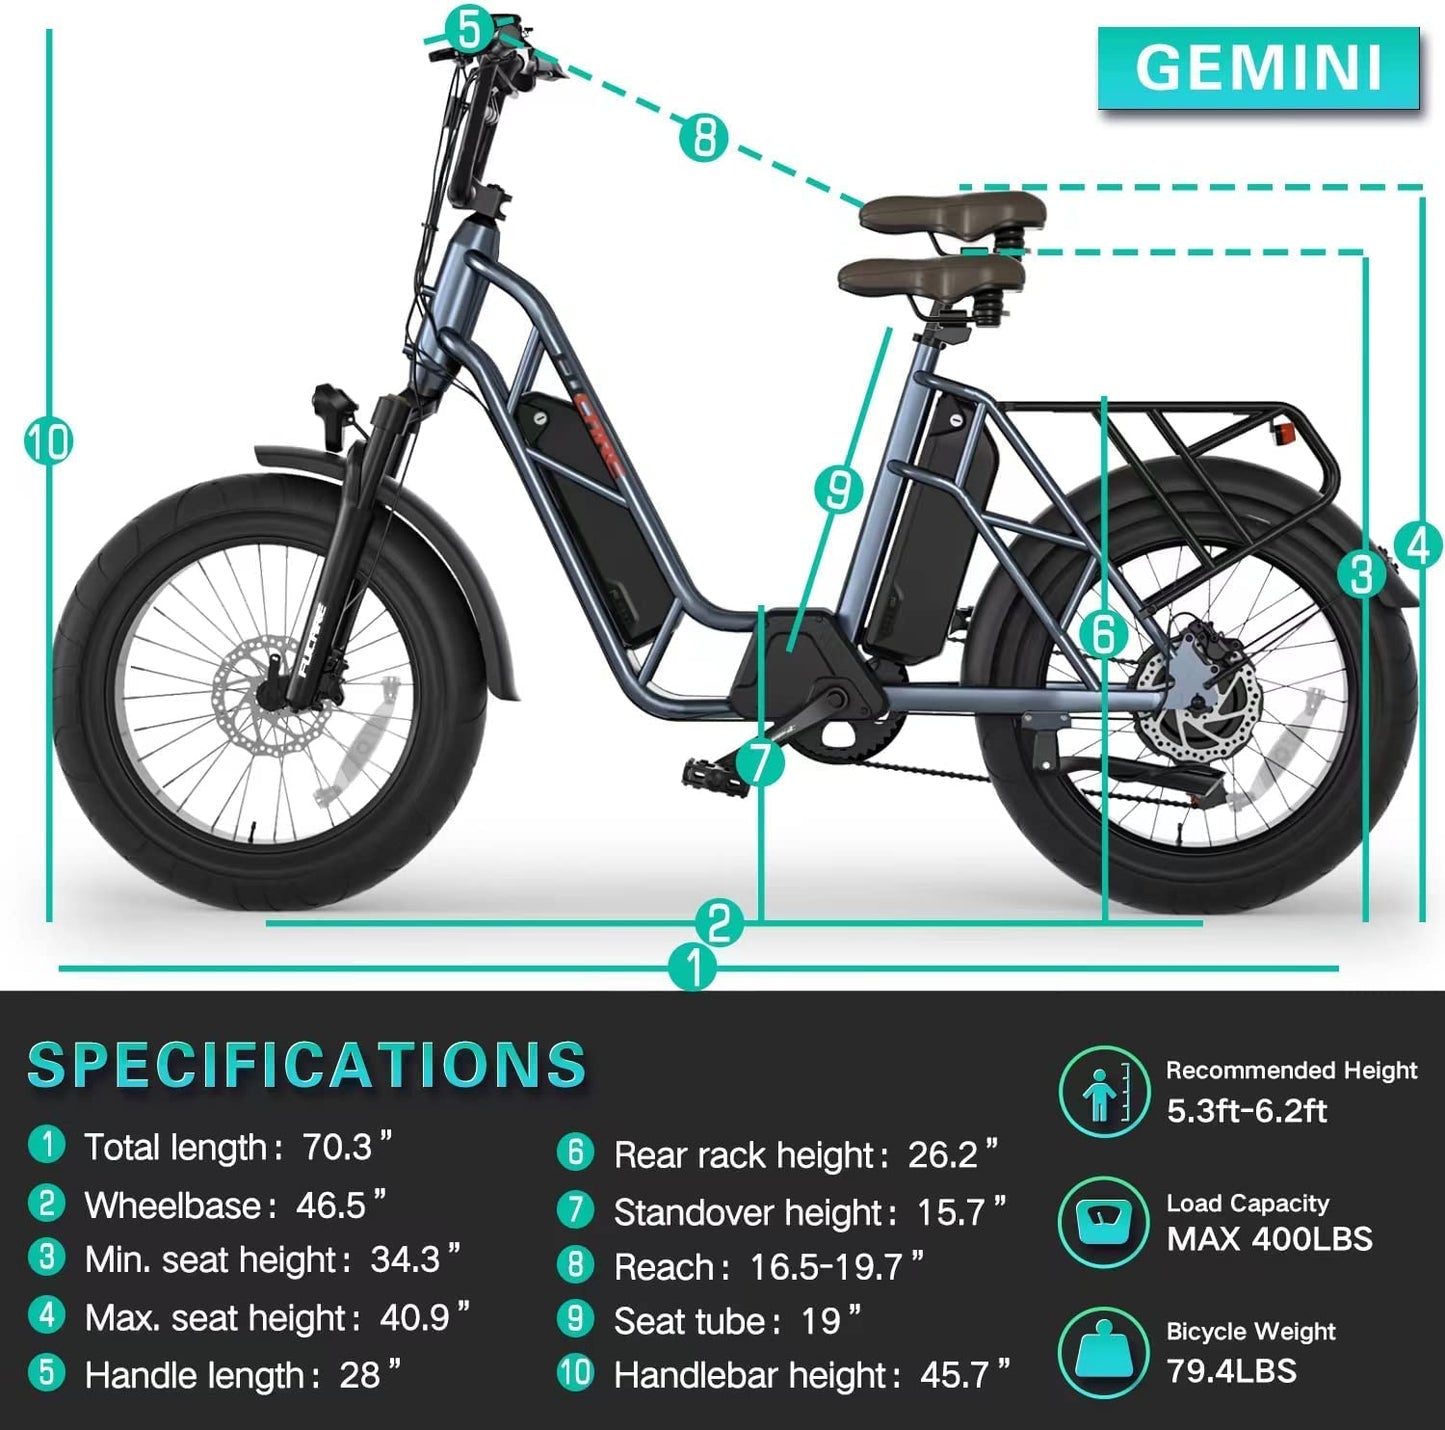 FUCARE Gemini 750W Electric Bike; 20''  4.0" Fat Tire; 48V 20.8 AH Dual Removable Lithium Battery;28MPH Max Speed; 5.3" LCD Display